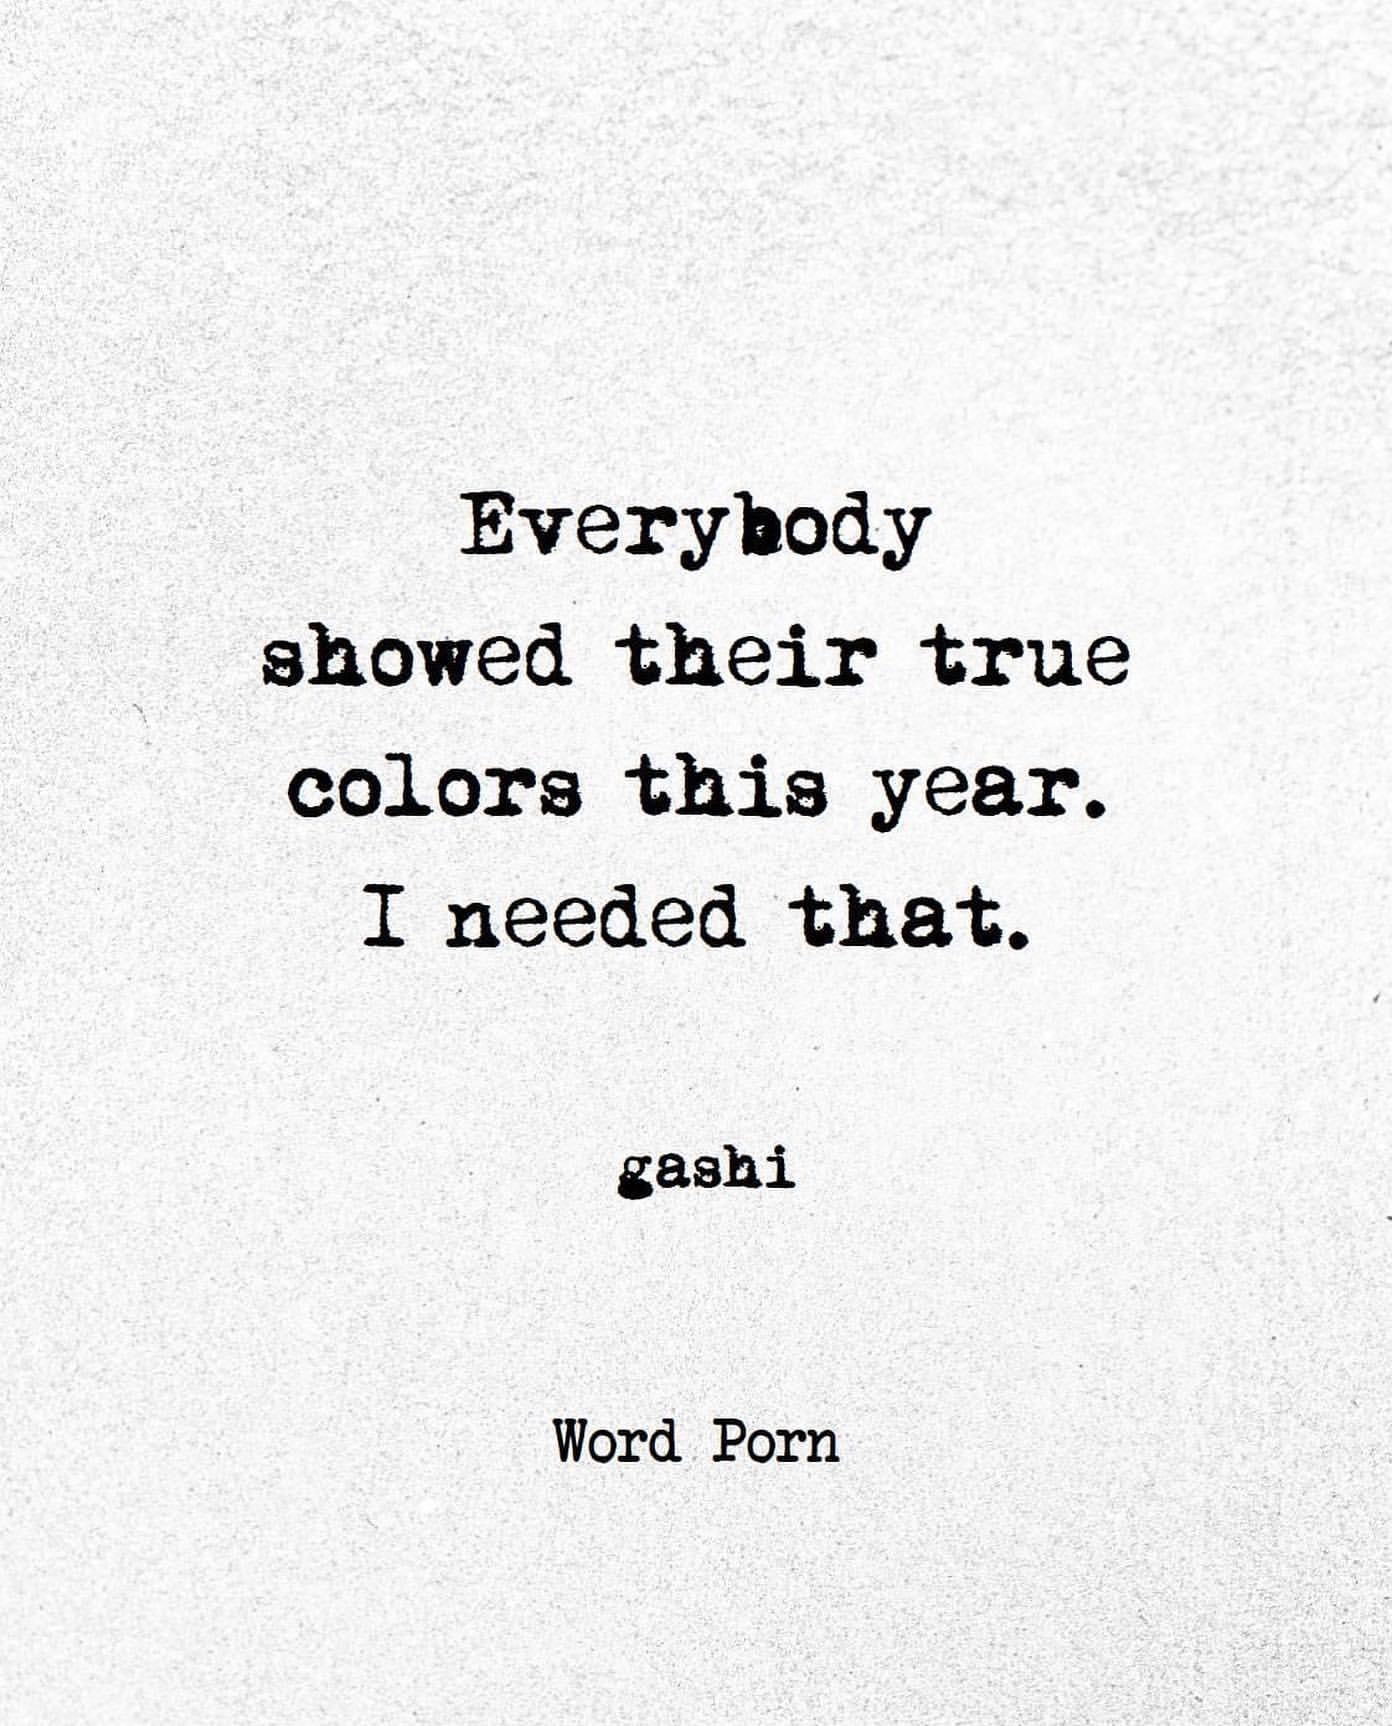 Everybody showed their true colors this year. I needed that.